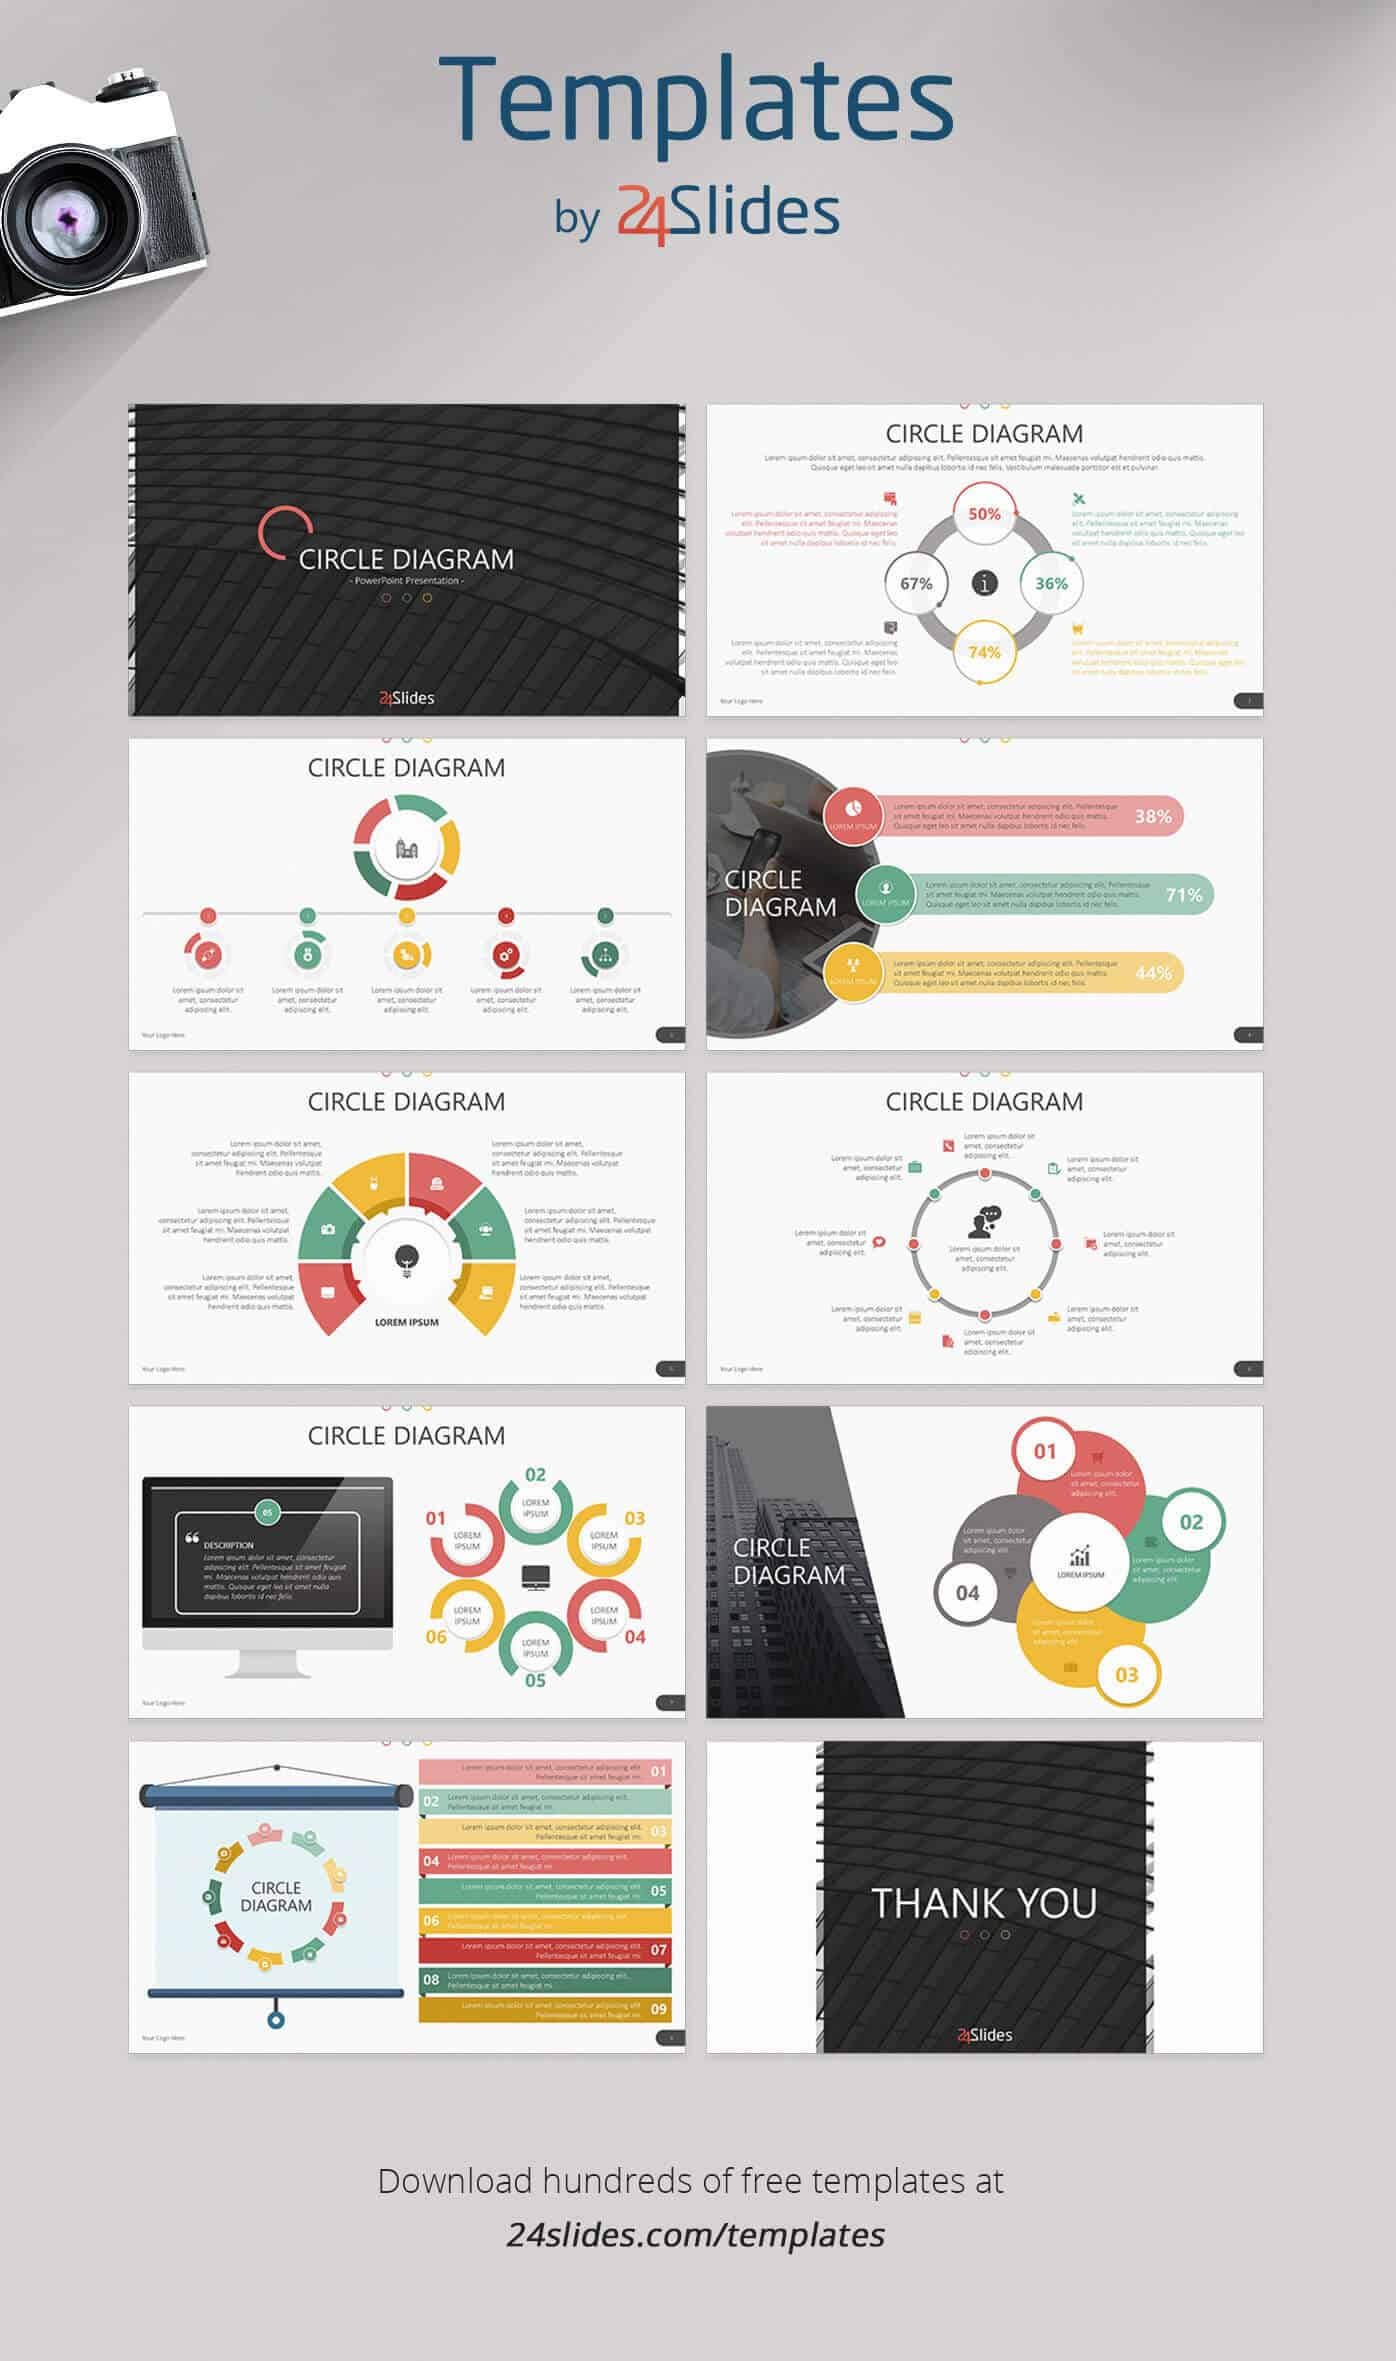 15 Fun And Colorful Free Powerpoint Templates | Present Better Regarding Sample Templates For Powerpoint Presentation